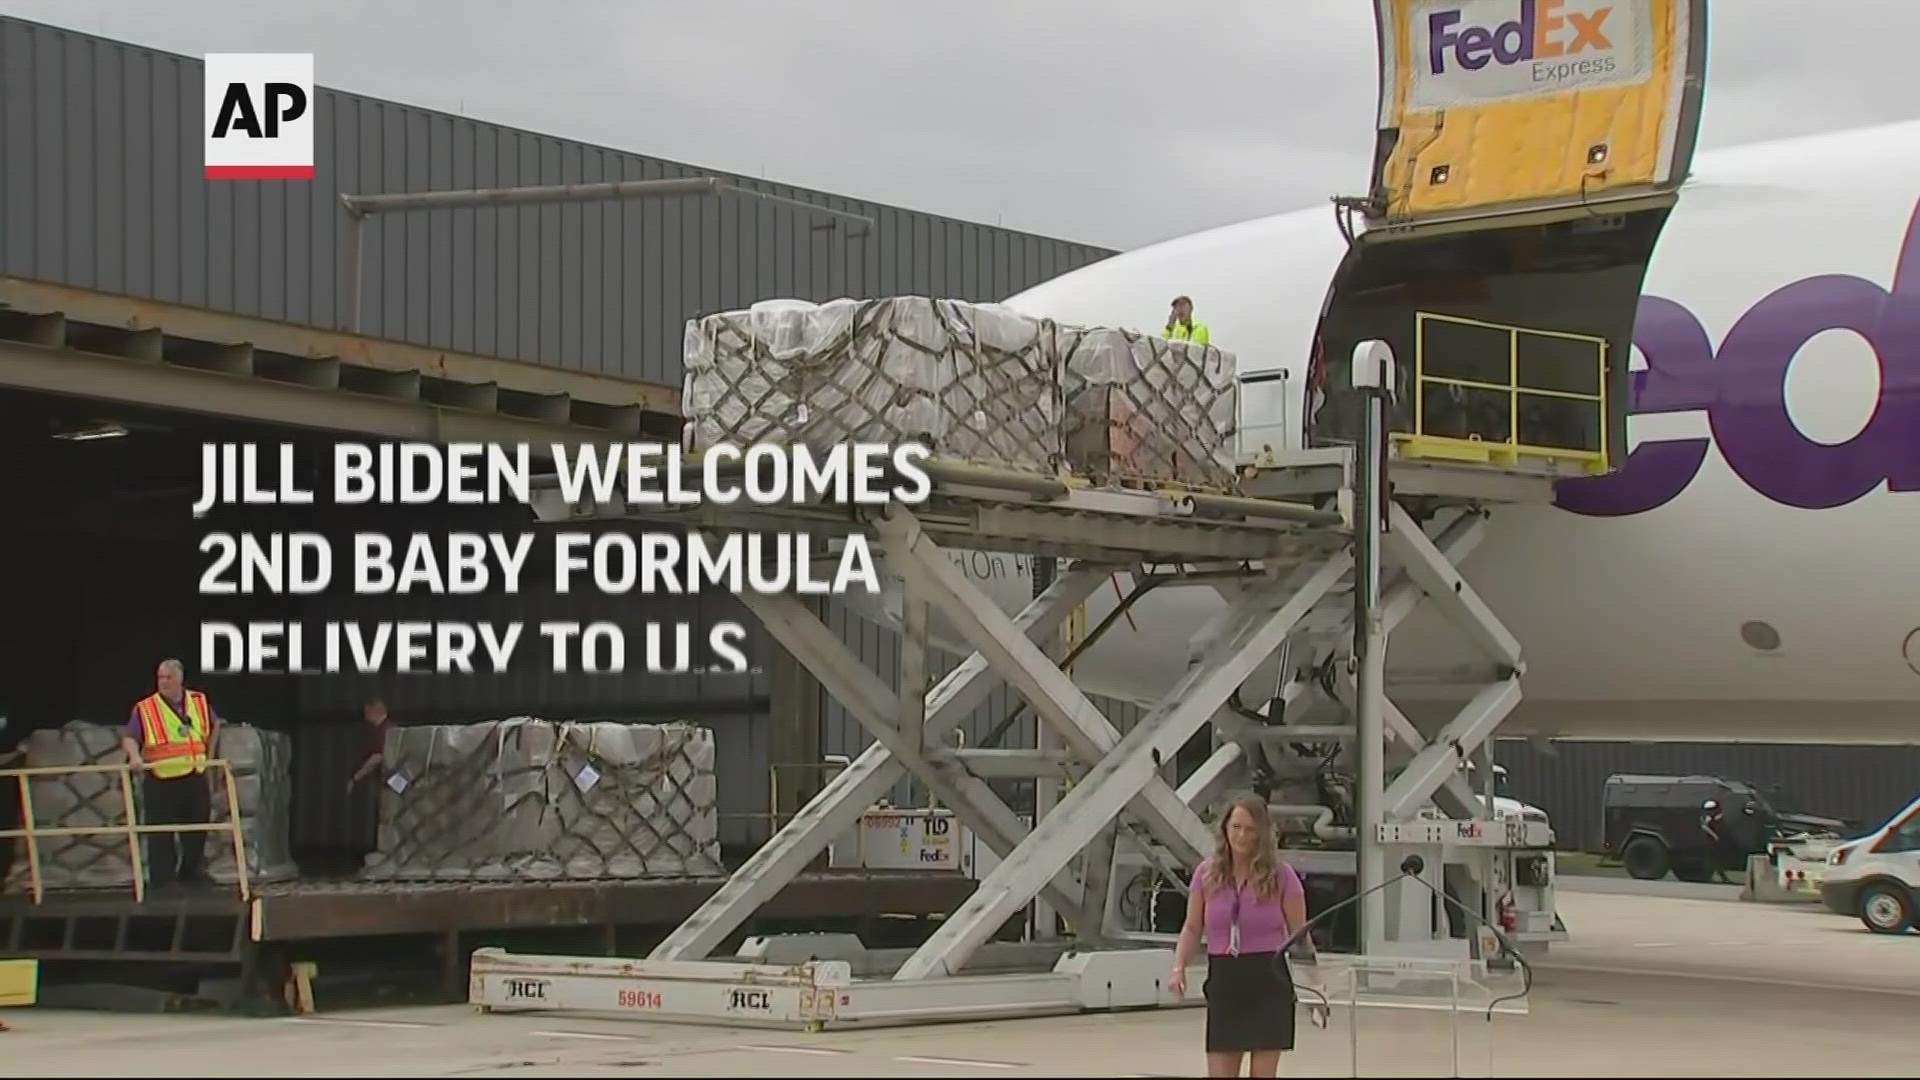 A FedEx plane delivered 60 tons of formula from Ramstein Air Base in Germany under the administration's Operation Fly Formula program.